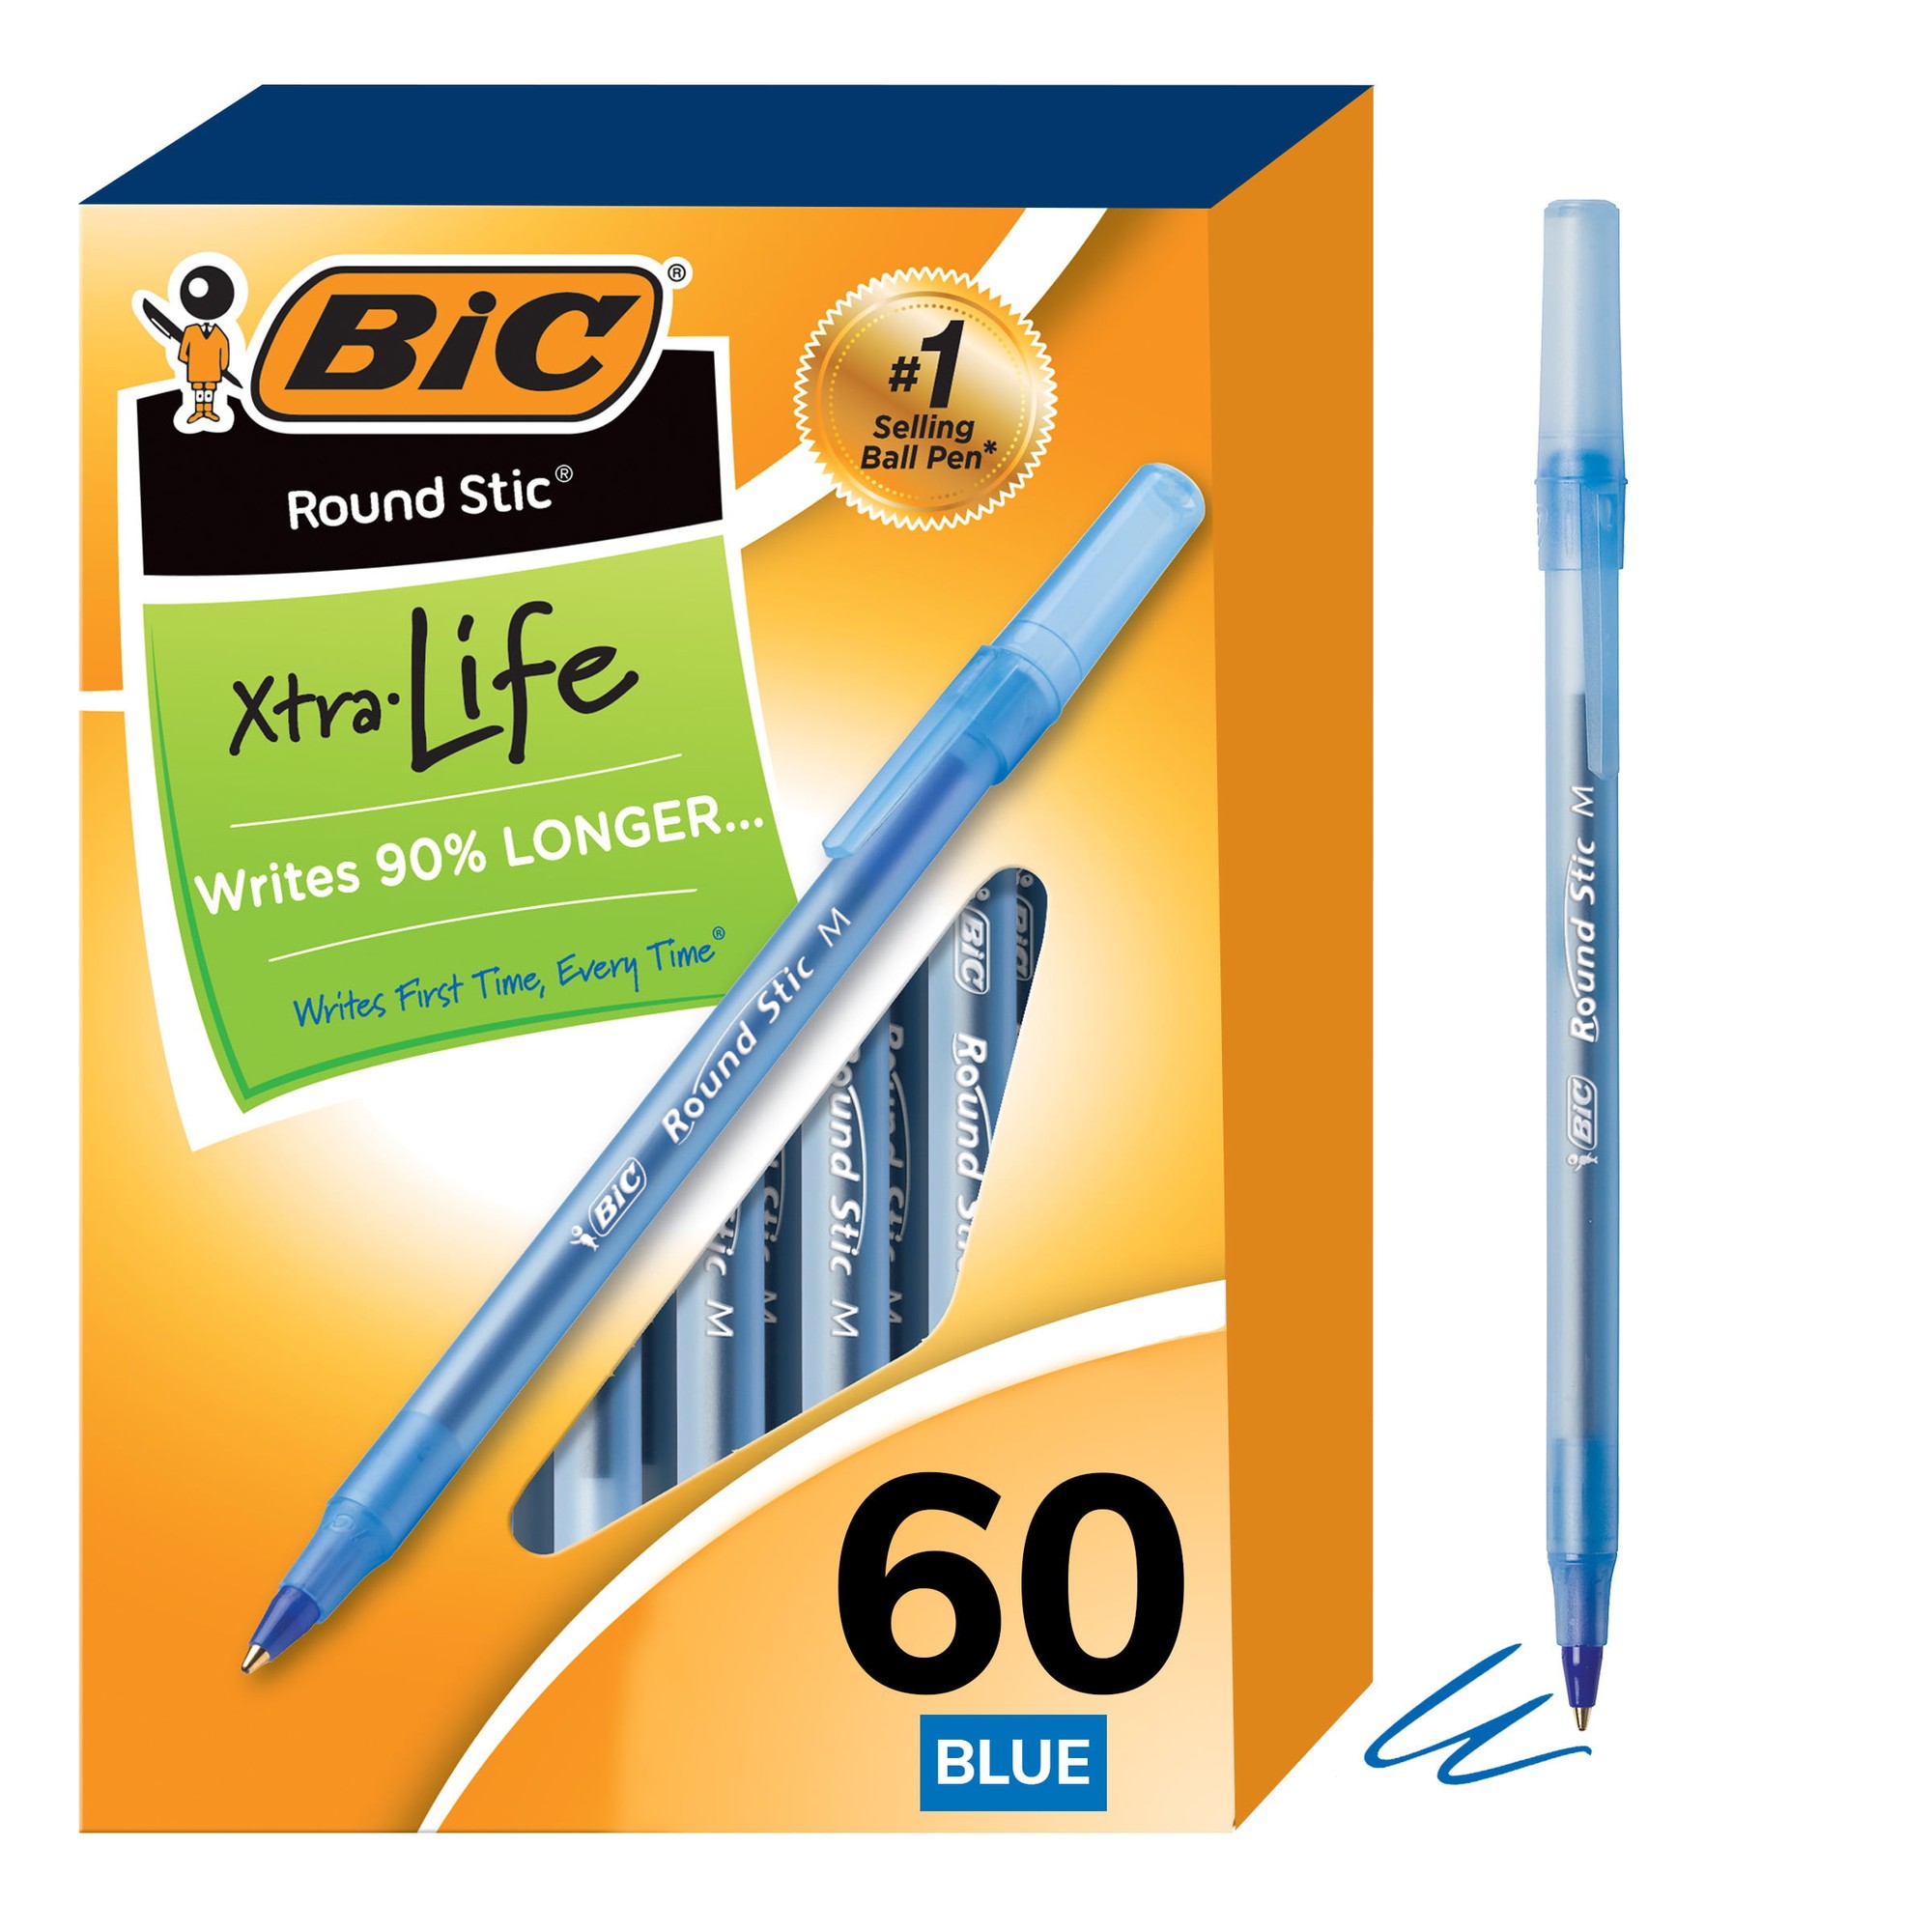 Round Stic Xtra Life Ball Pen, Blue, Pack of 60